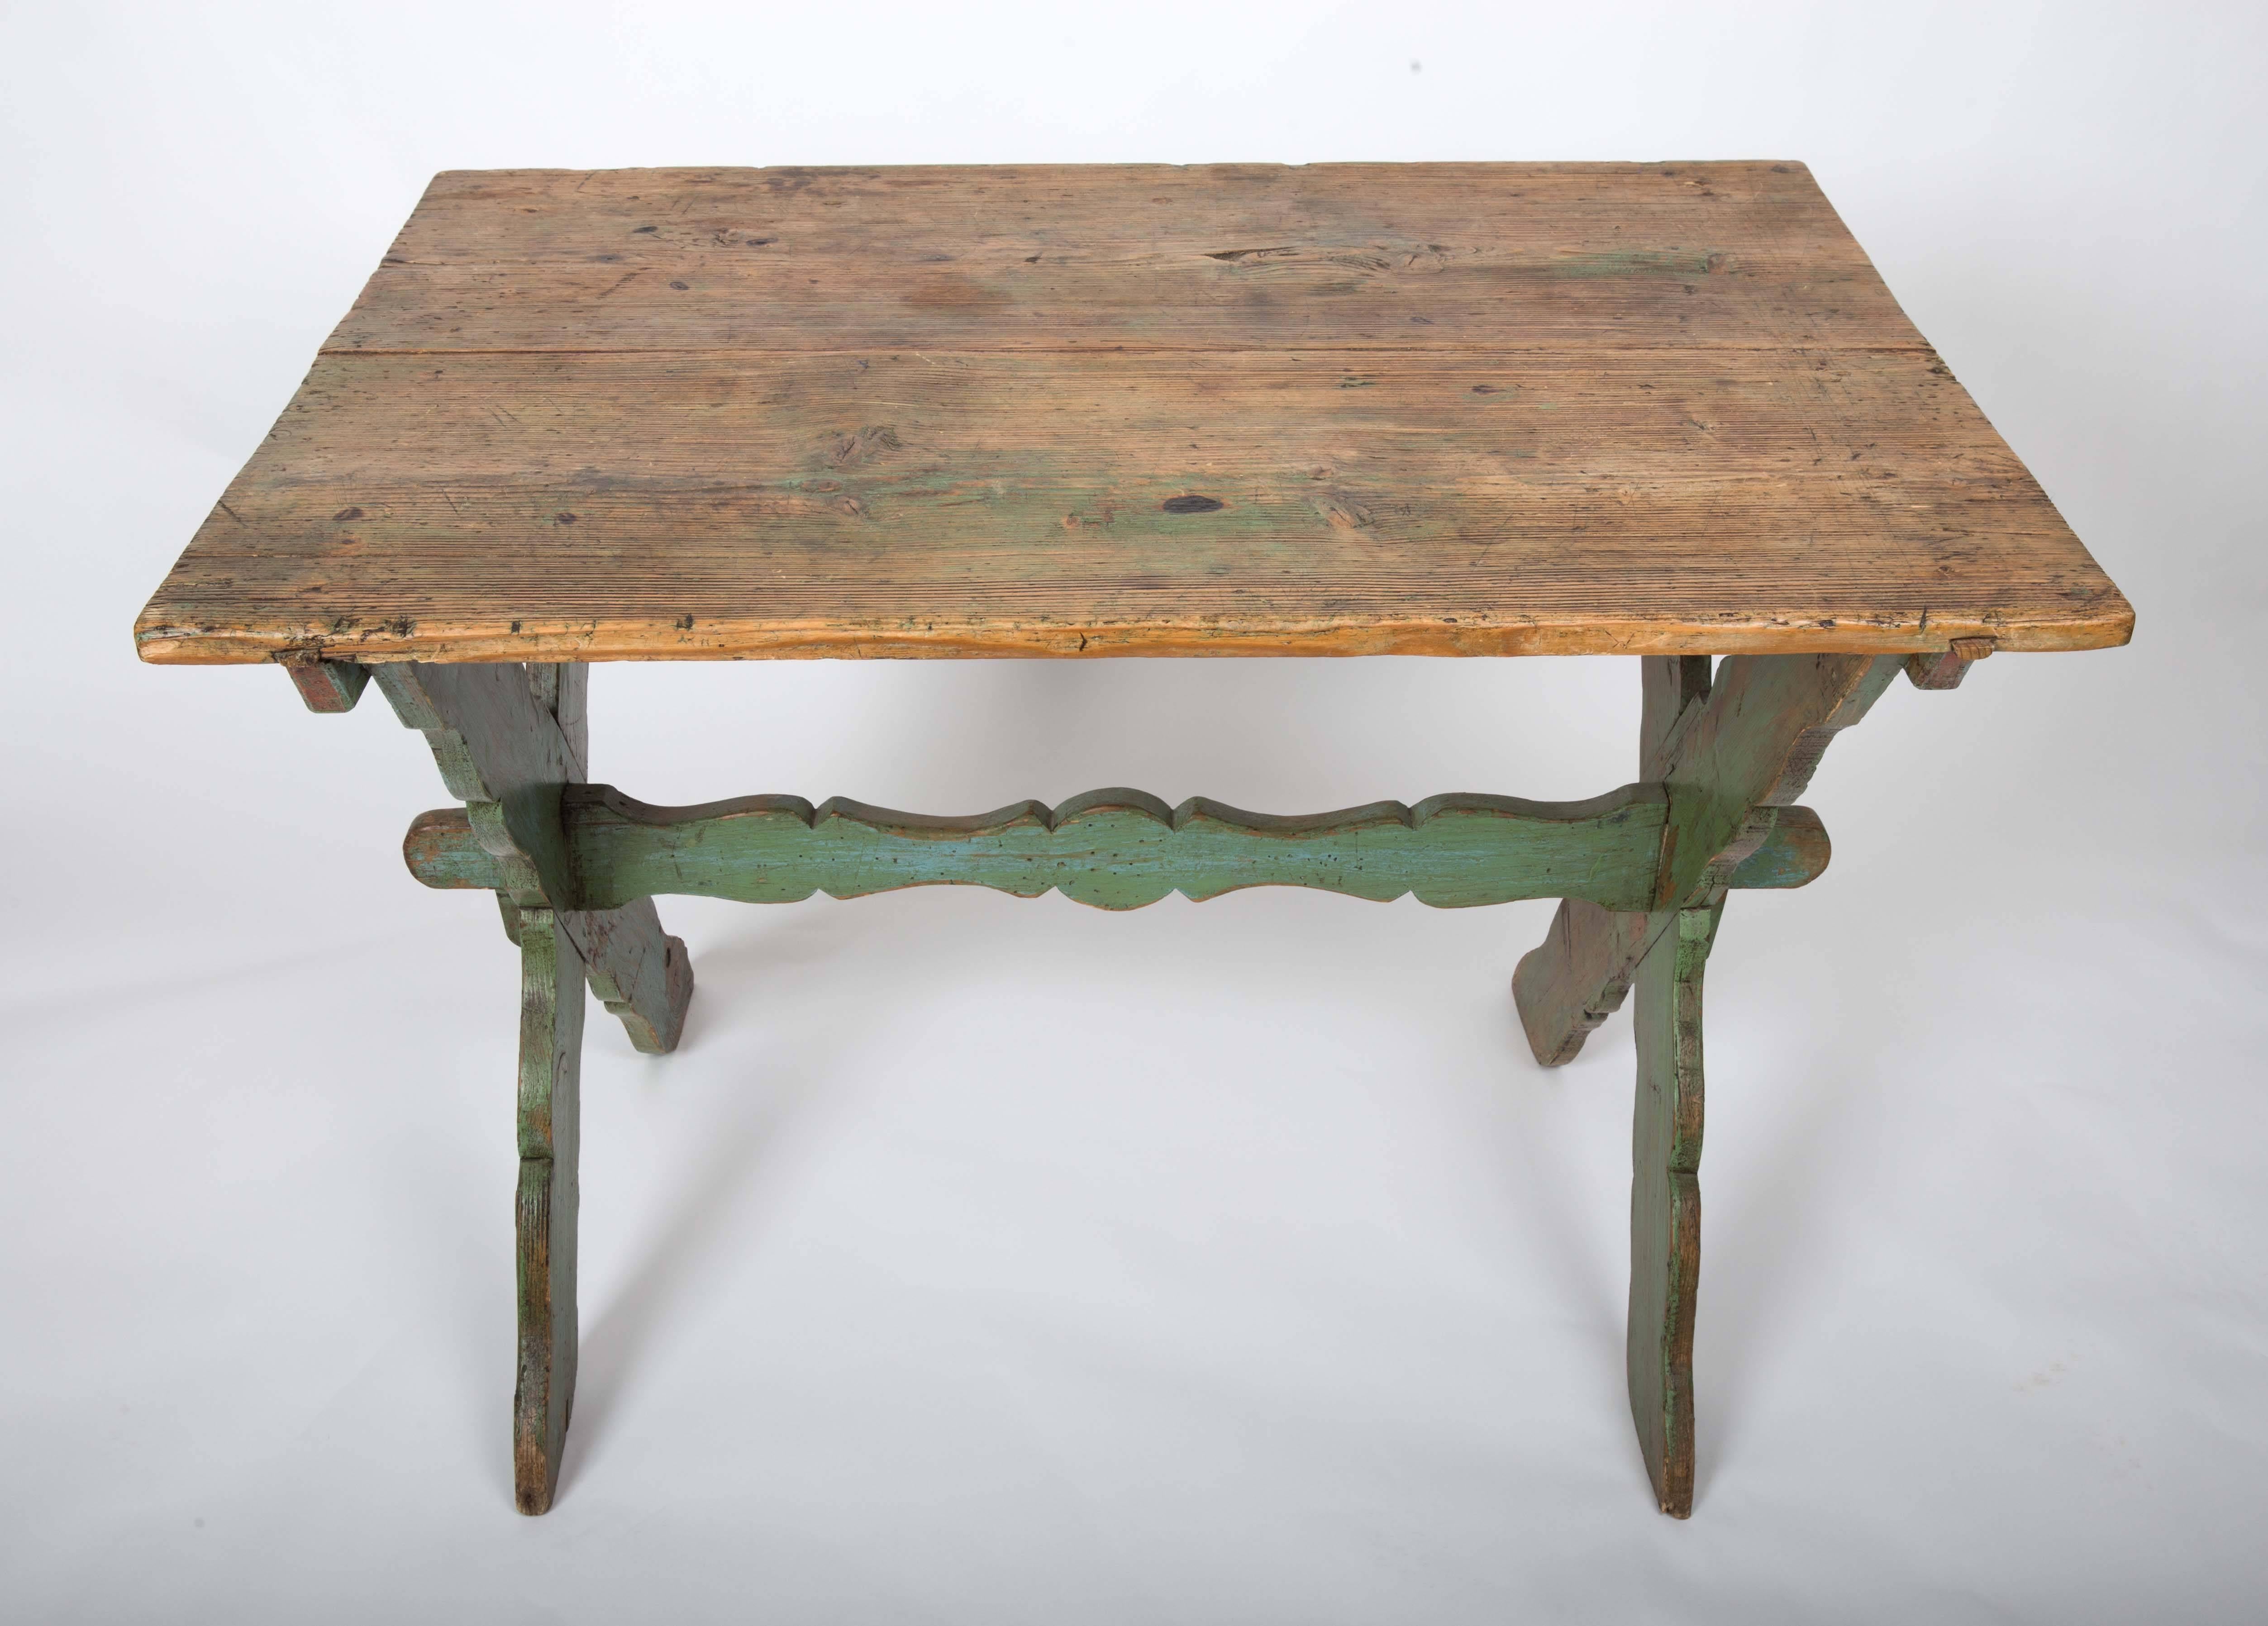 Rustic wooden table with patina and painted 